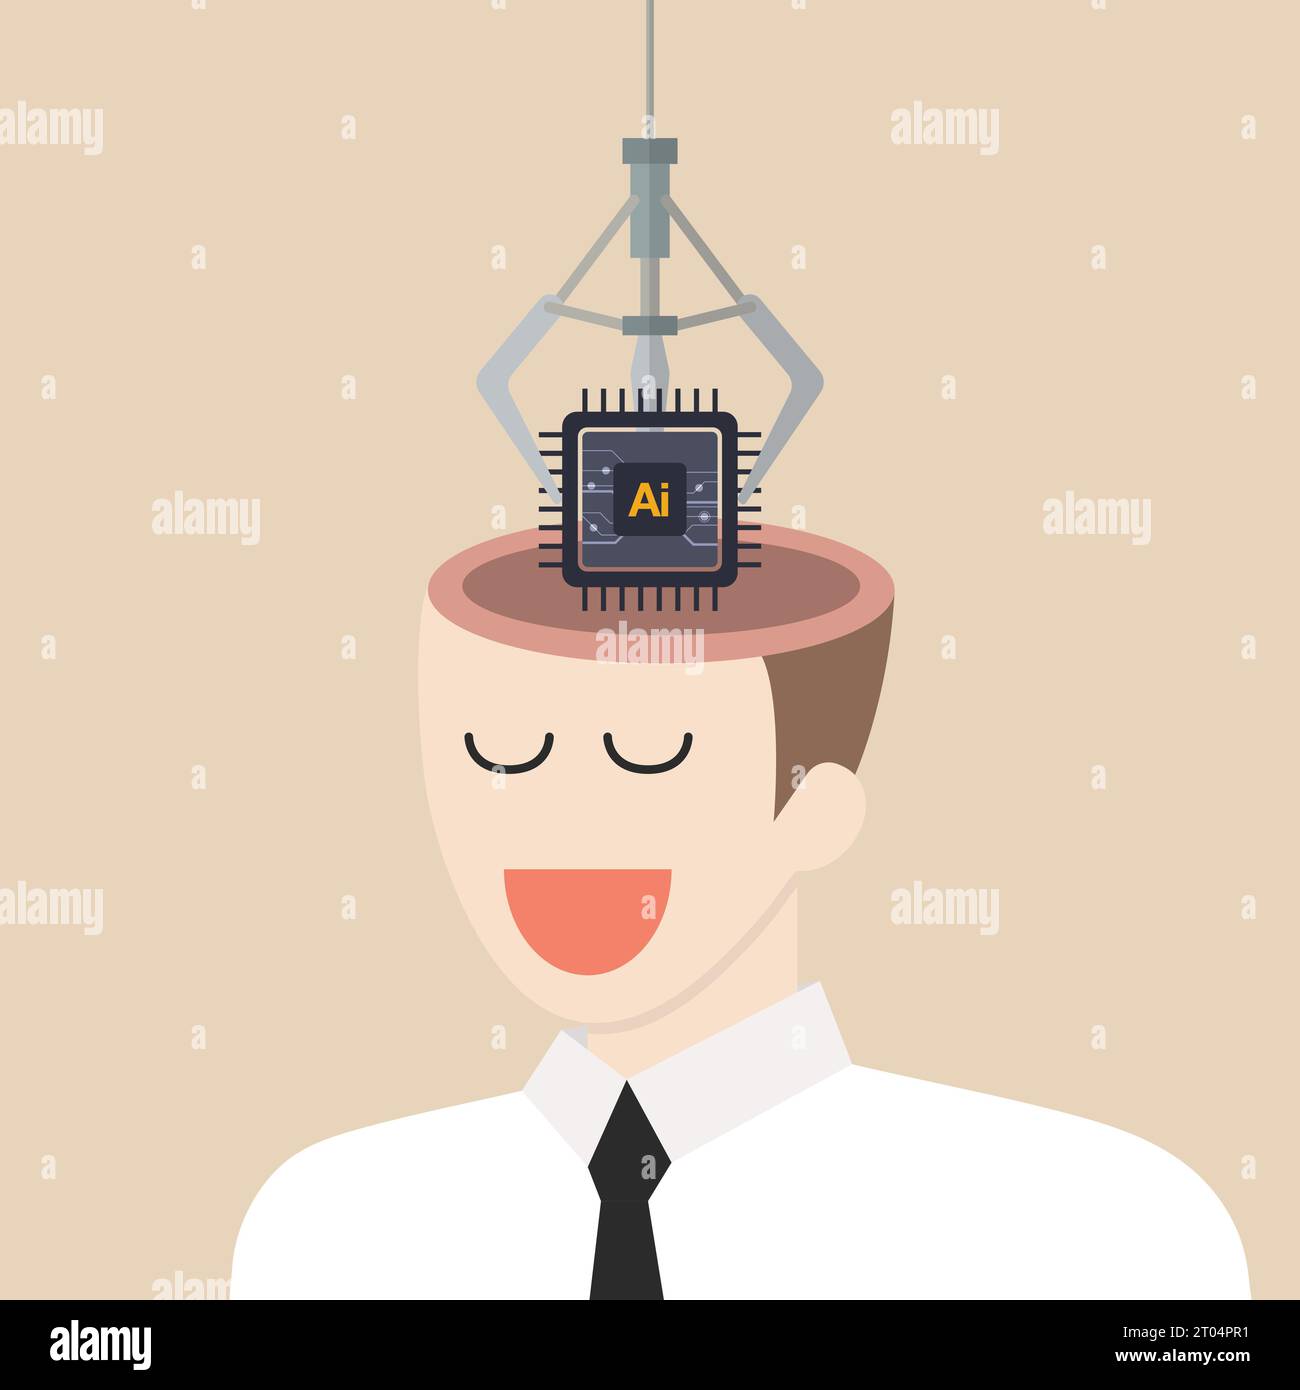 Robot arm put AI processing chip into human brain. machine learning and cyber mind domination concept. vector illustration. Stock Vector